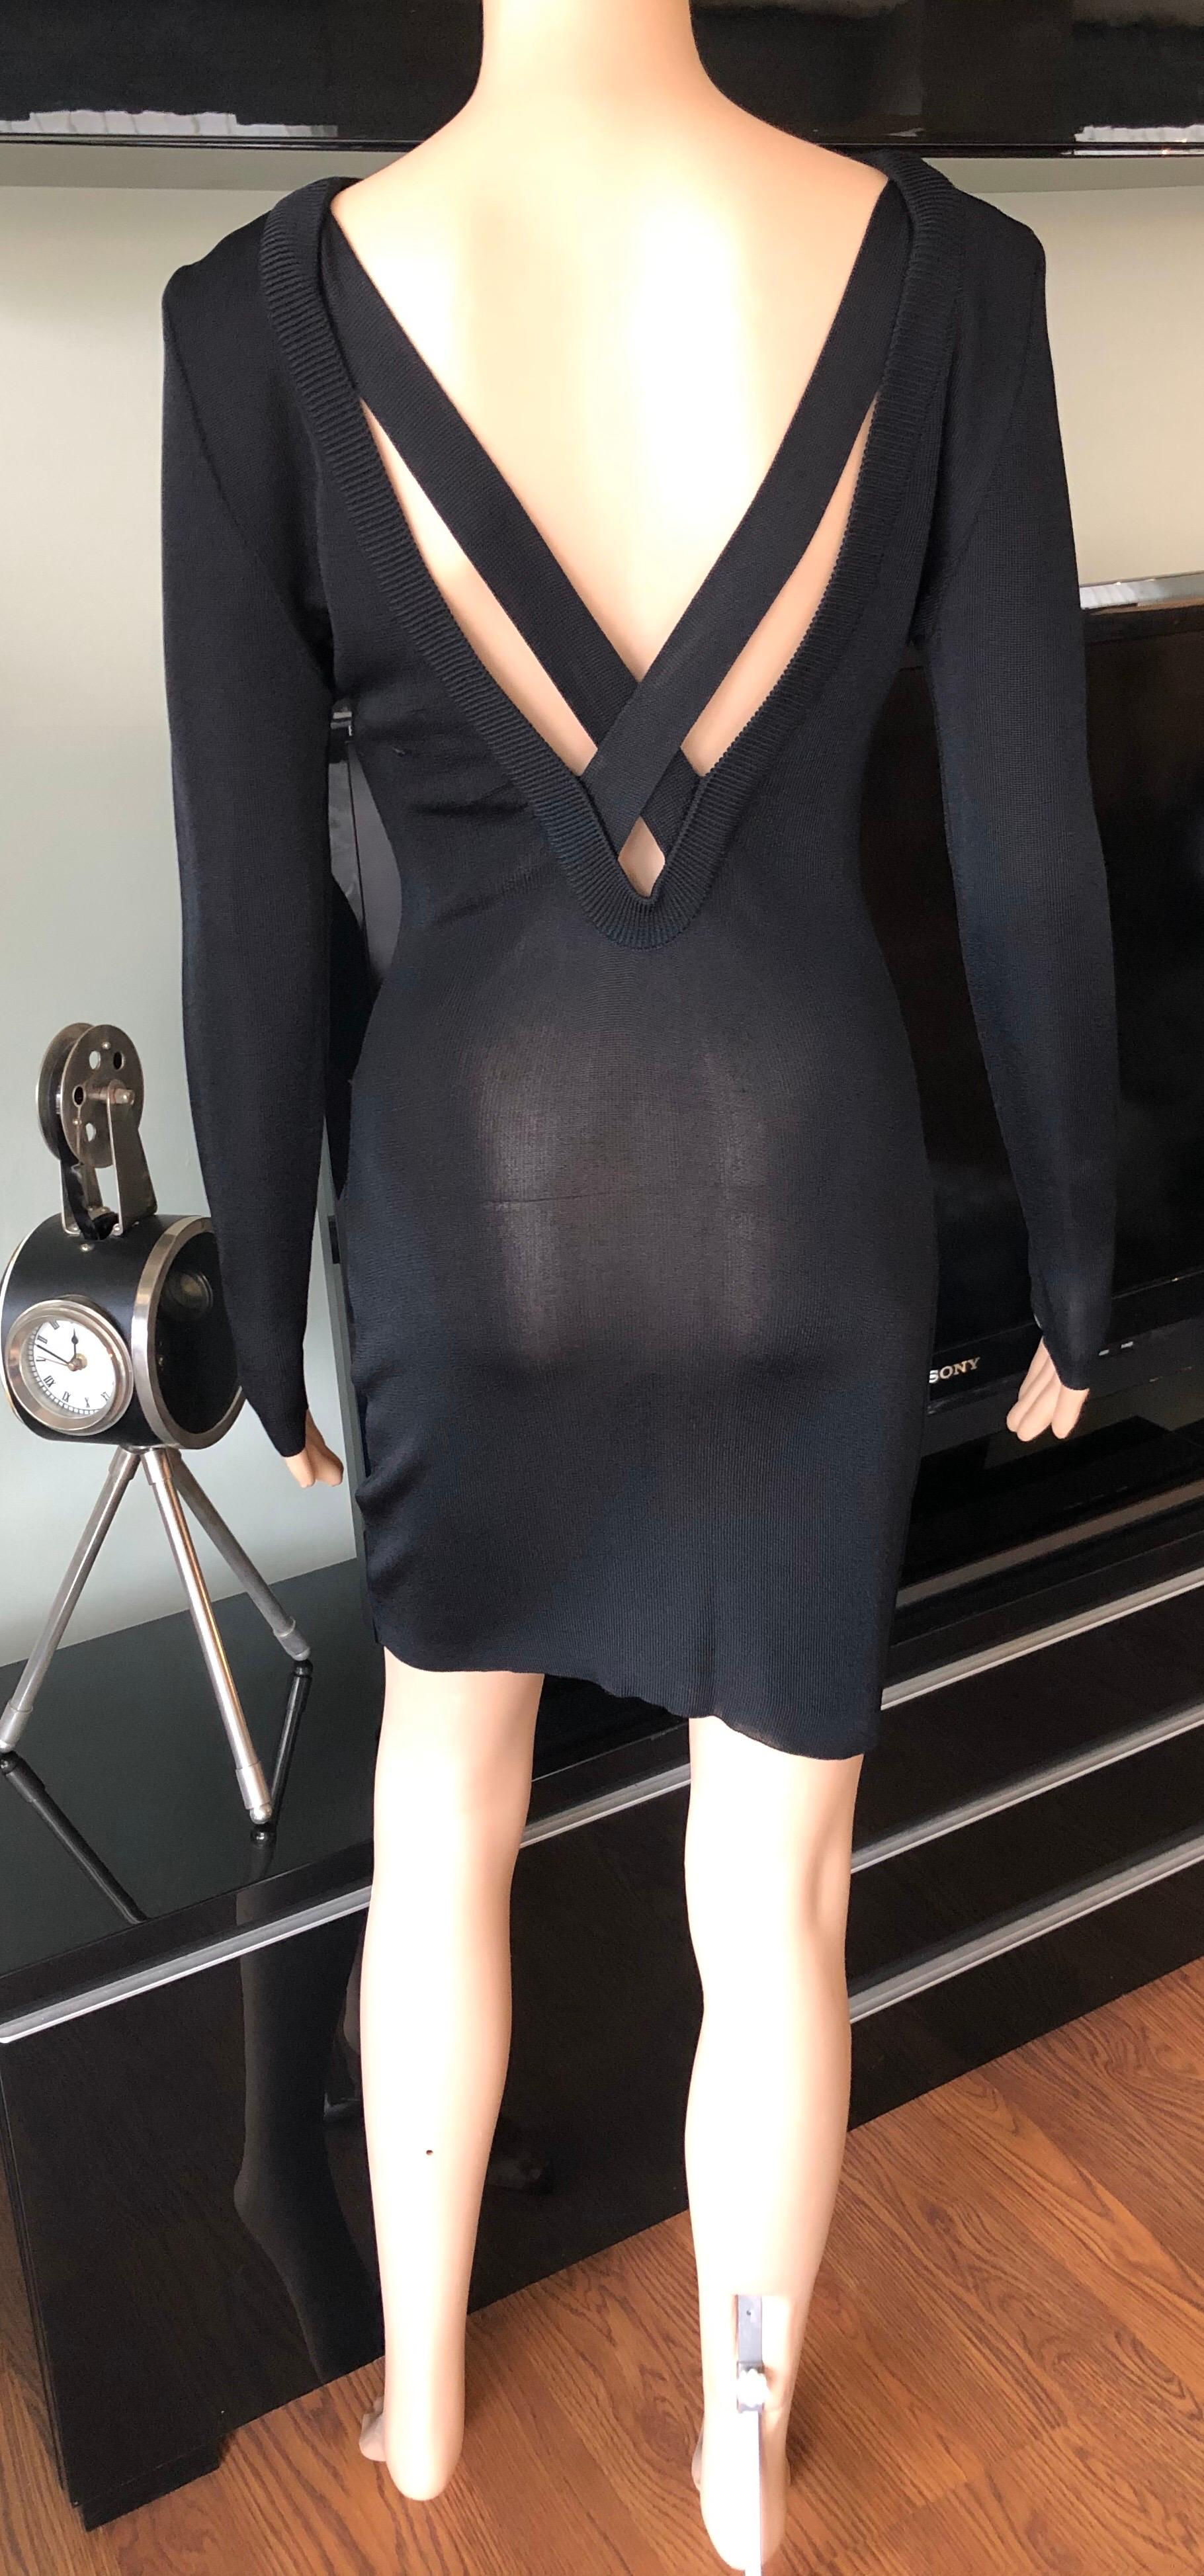 Gianni Versace c. 1980 Vintage Semi-Sheer Bodycon Knit Black Dress In Good Condition For Sale In Naples, FL